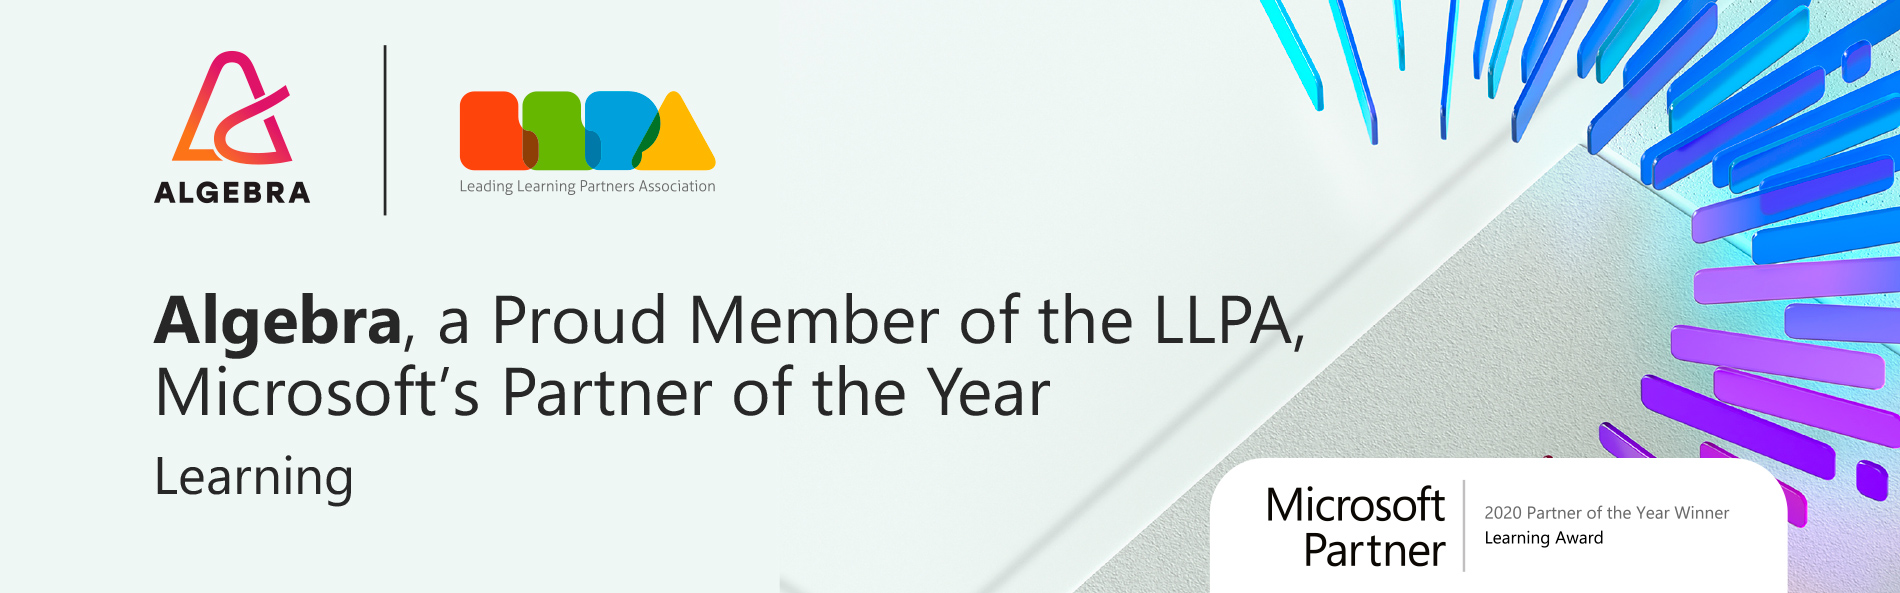 Image for LLPA, earns title of 2020 Microsoft Learning Partner of the Year